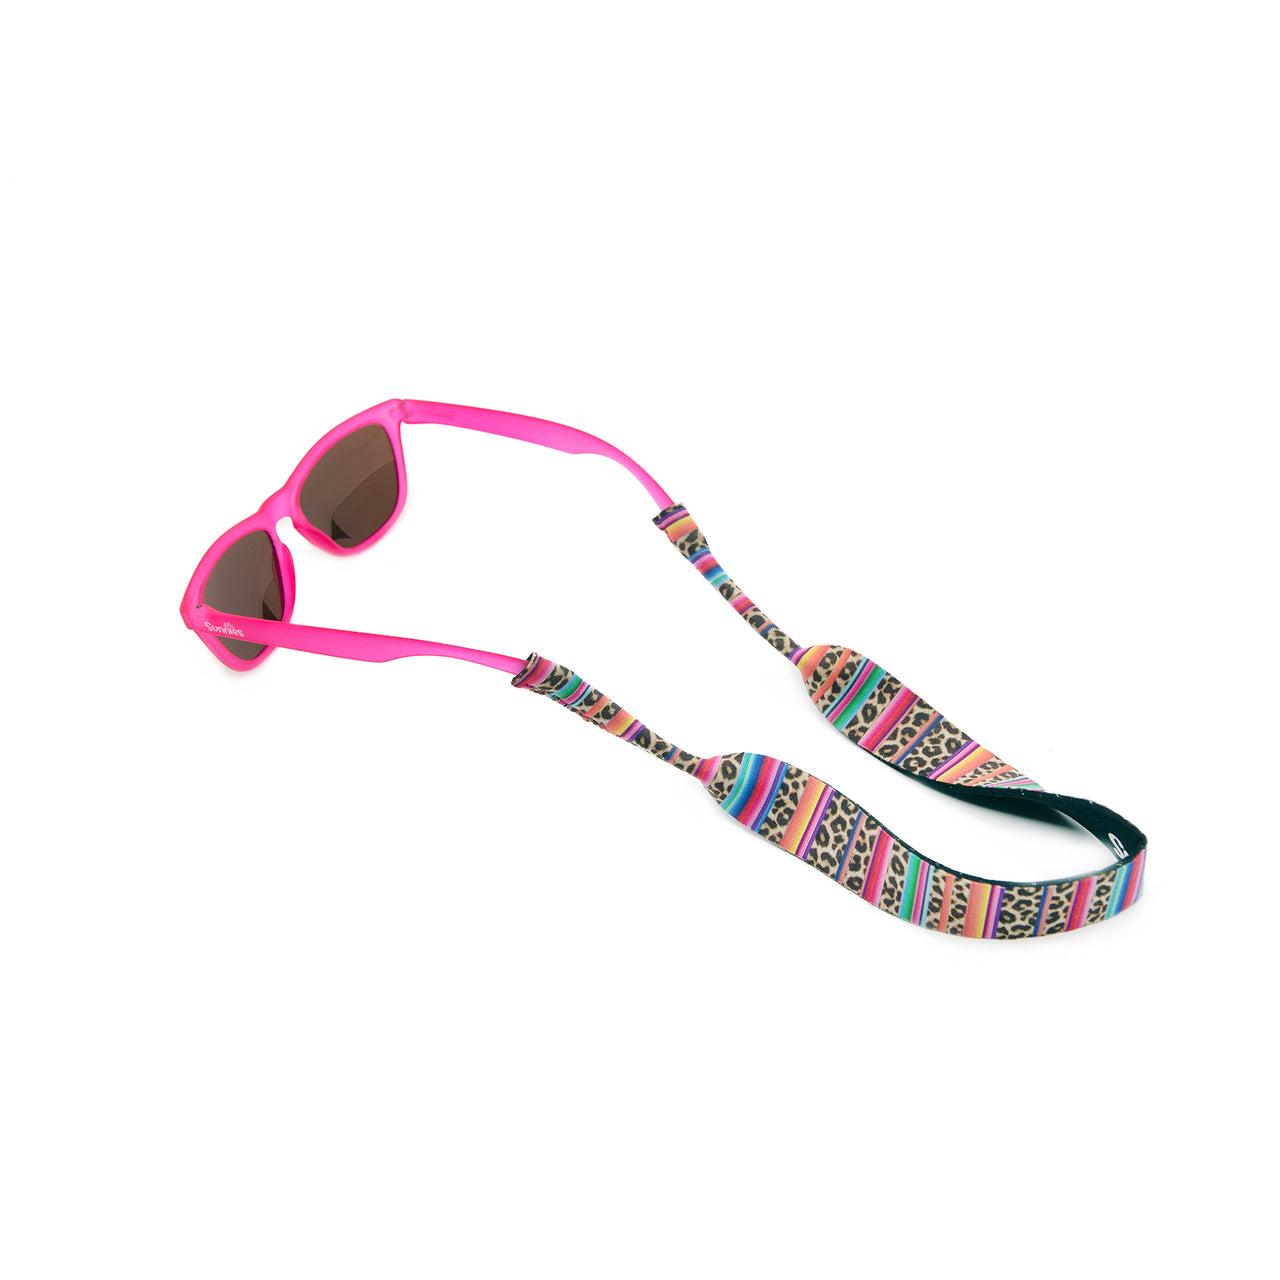 Kids sunglass leash attached to a pair of sunnies kids polarized sunglasses